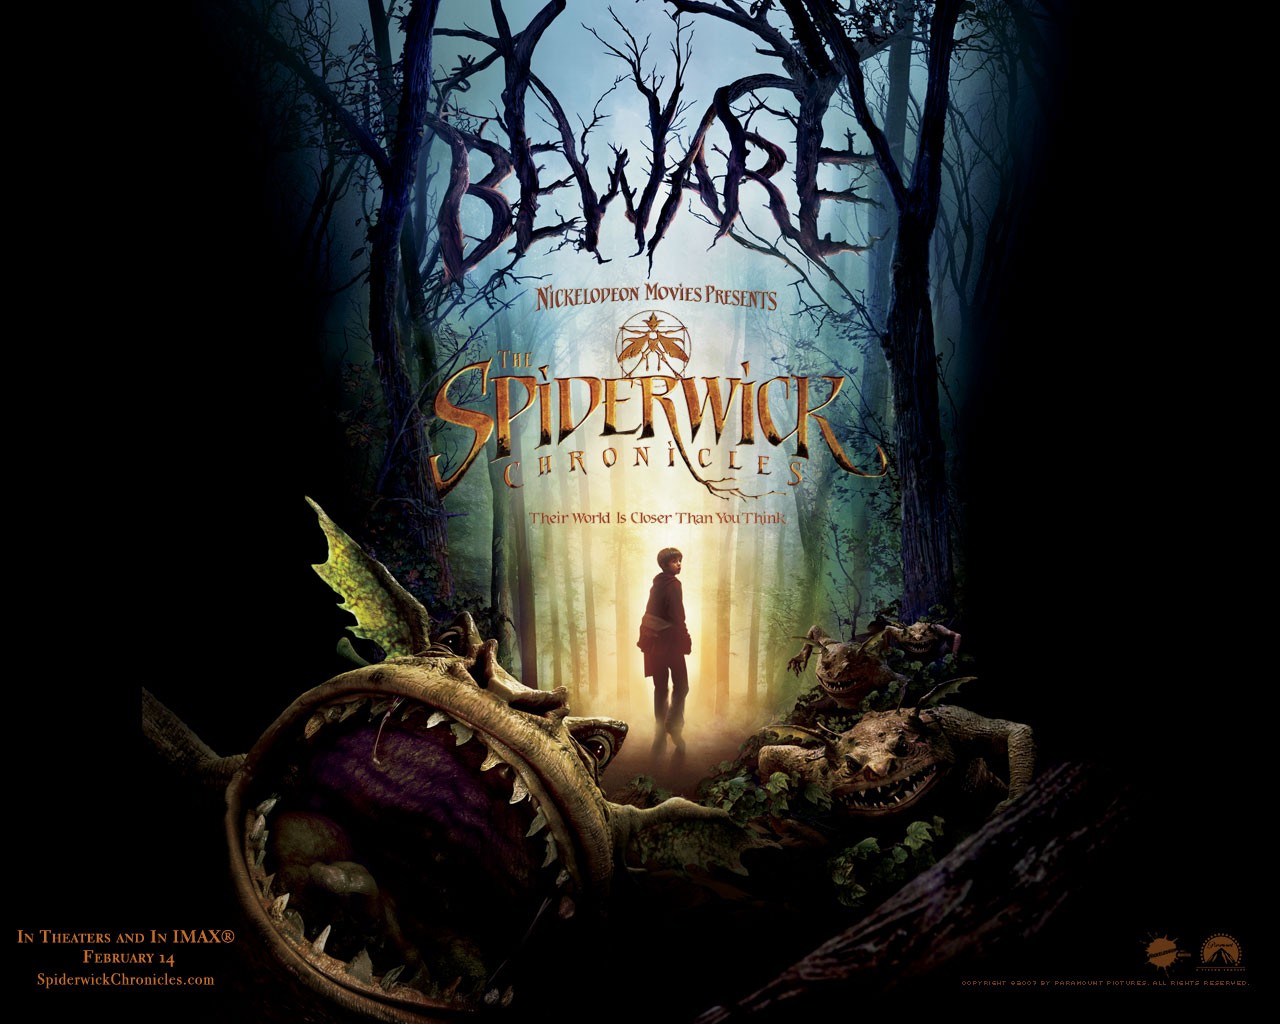 Download High quality The Spiderwick Chronicles wallpaper / Movies / 1280x1024